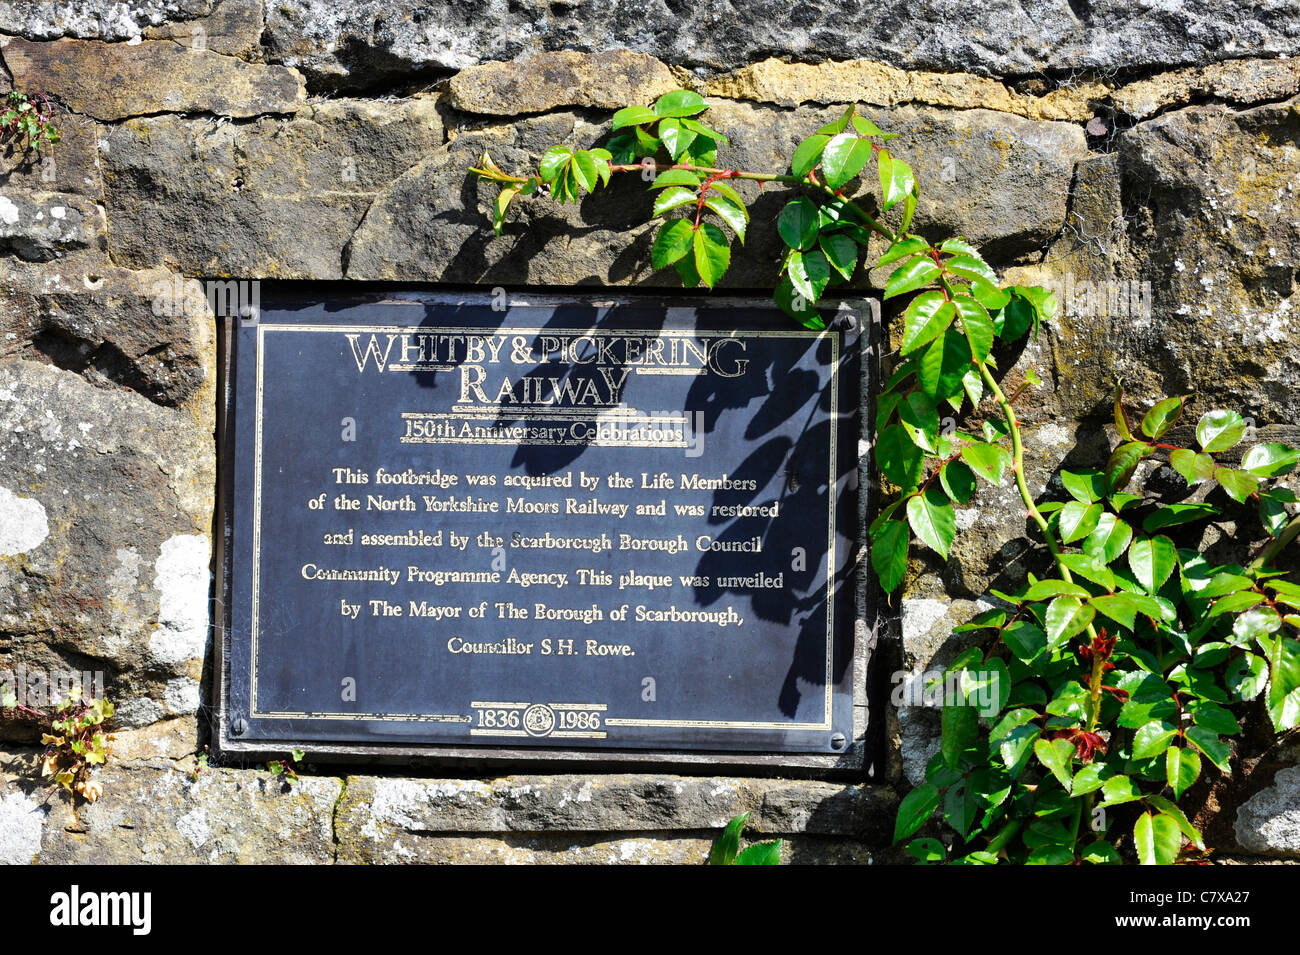 Whitby and Pickering Railway Plaque at Goathland Station. Stock Photo